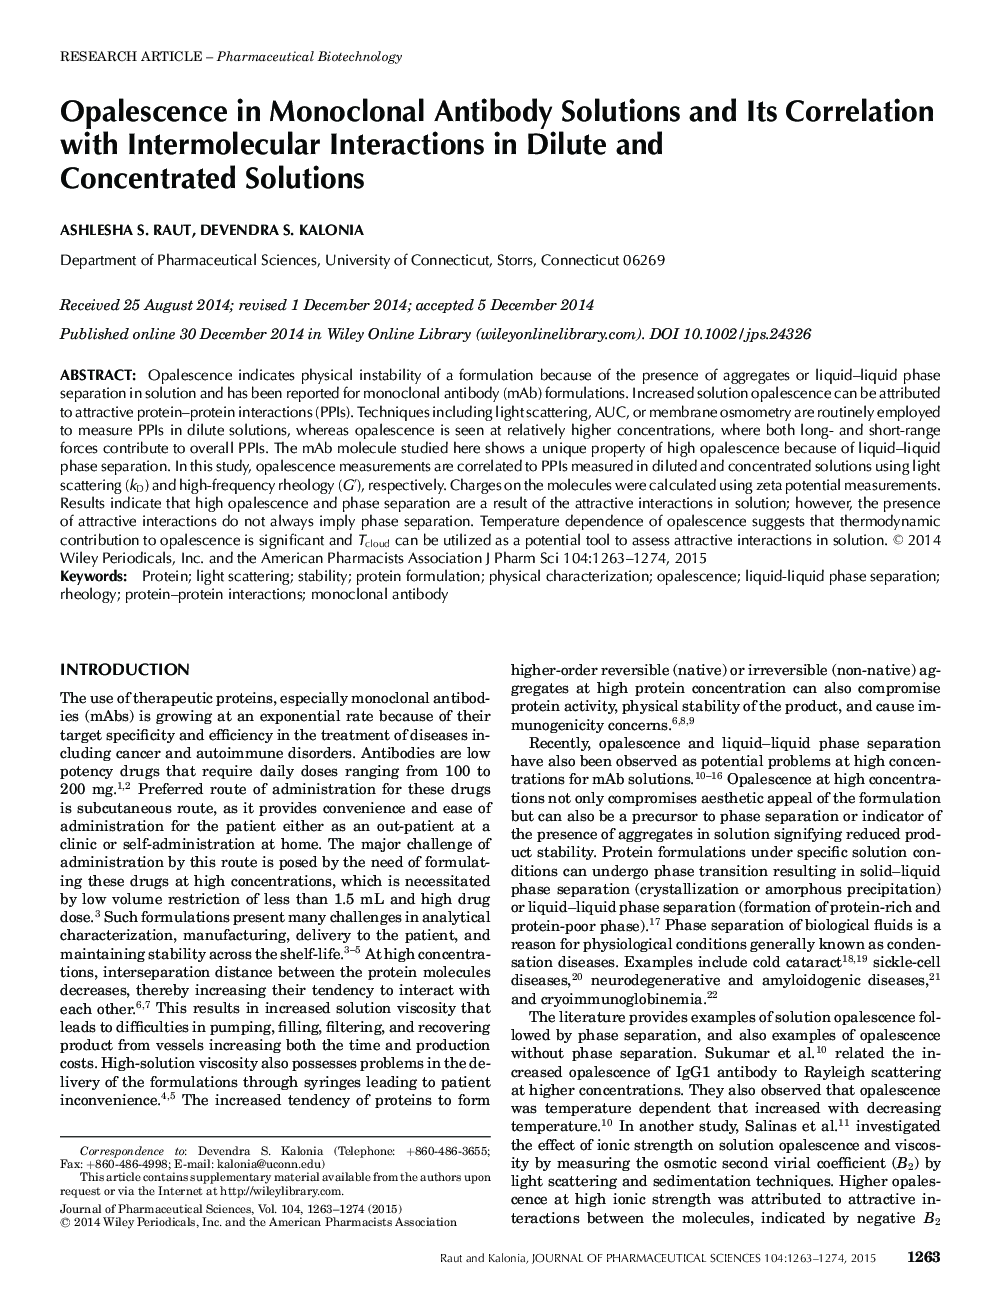 Opalescence in Monoclonal Antibody Solutions and Its Correlation with Intermolecular Interactions in Dilute and Concentrated Solutions